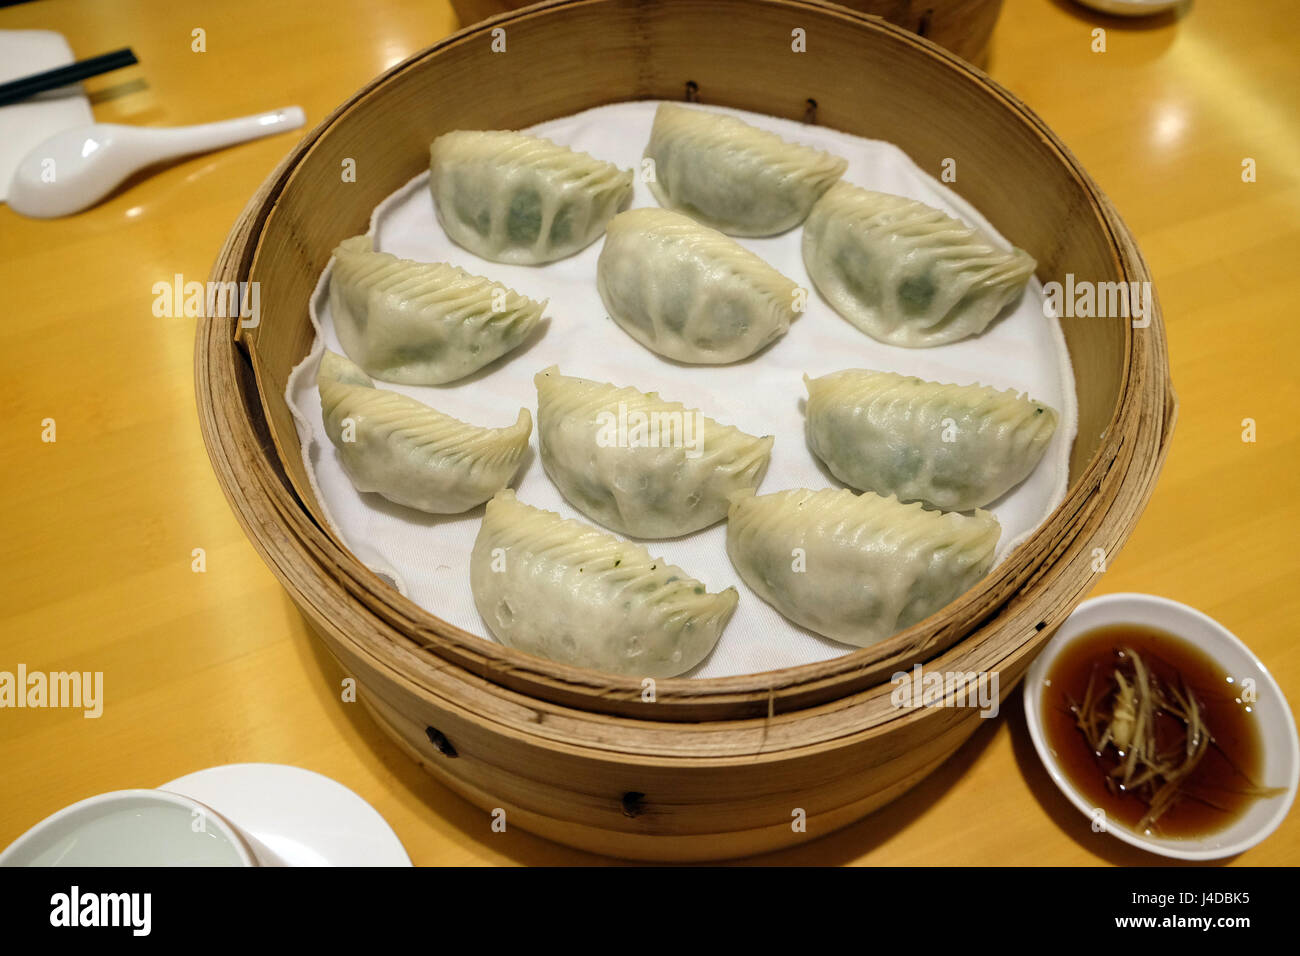 Chinese steamed dumpling in Bamboo Steamer, commonly eaten in East Asia in Beijing, China, February 23, 2016. Stock Photo